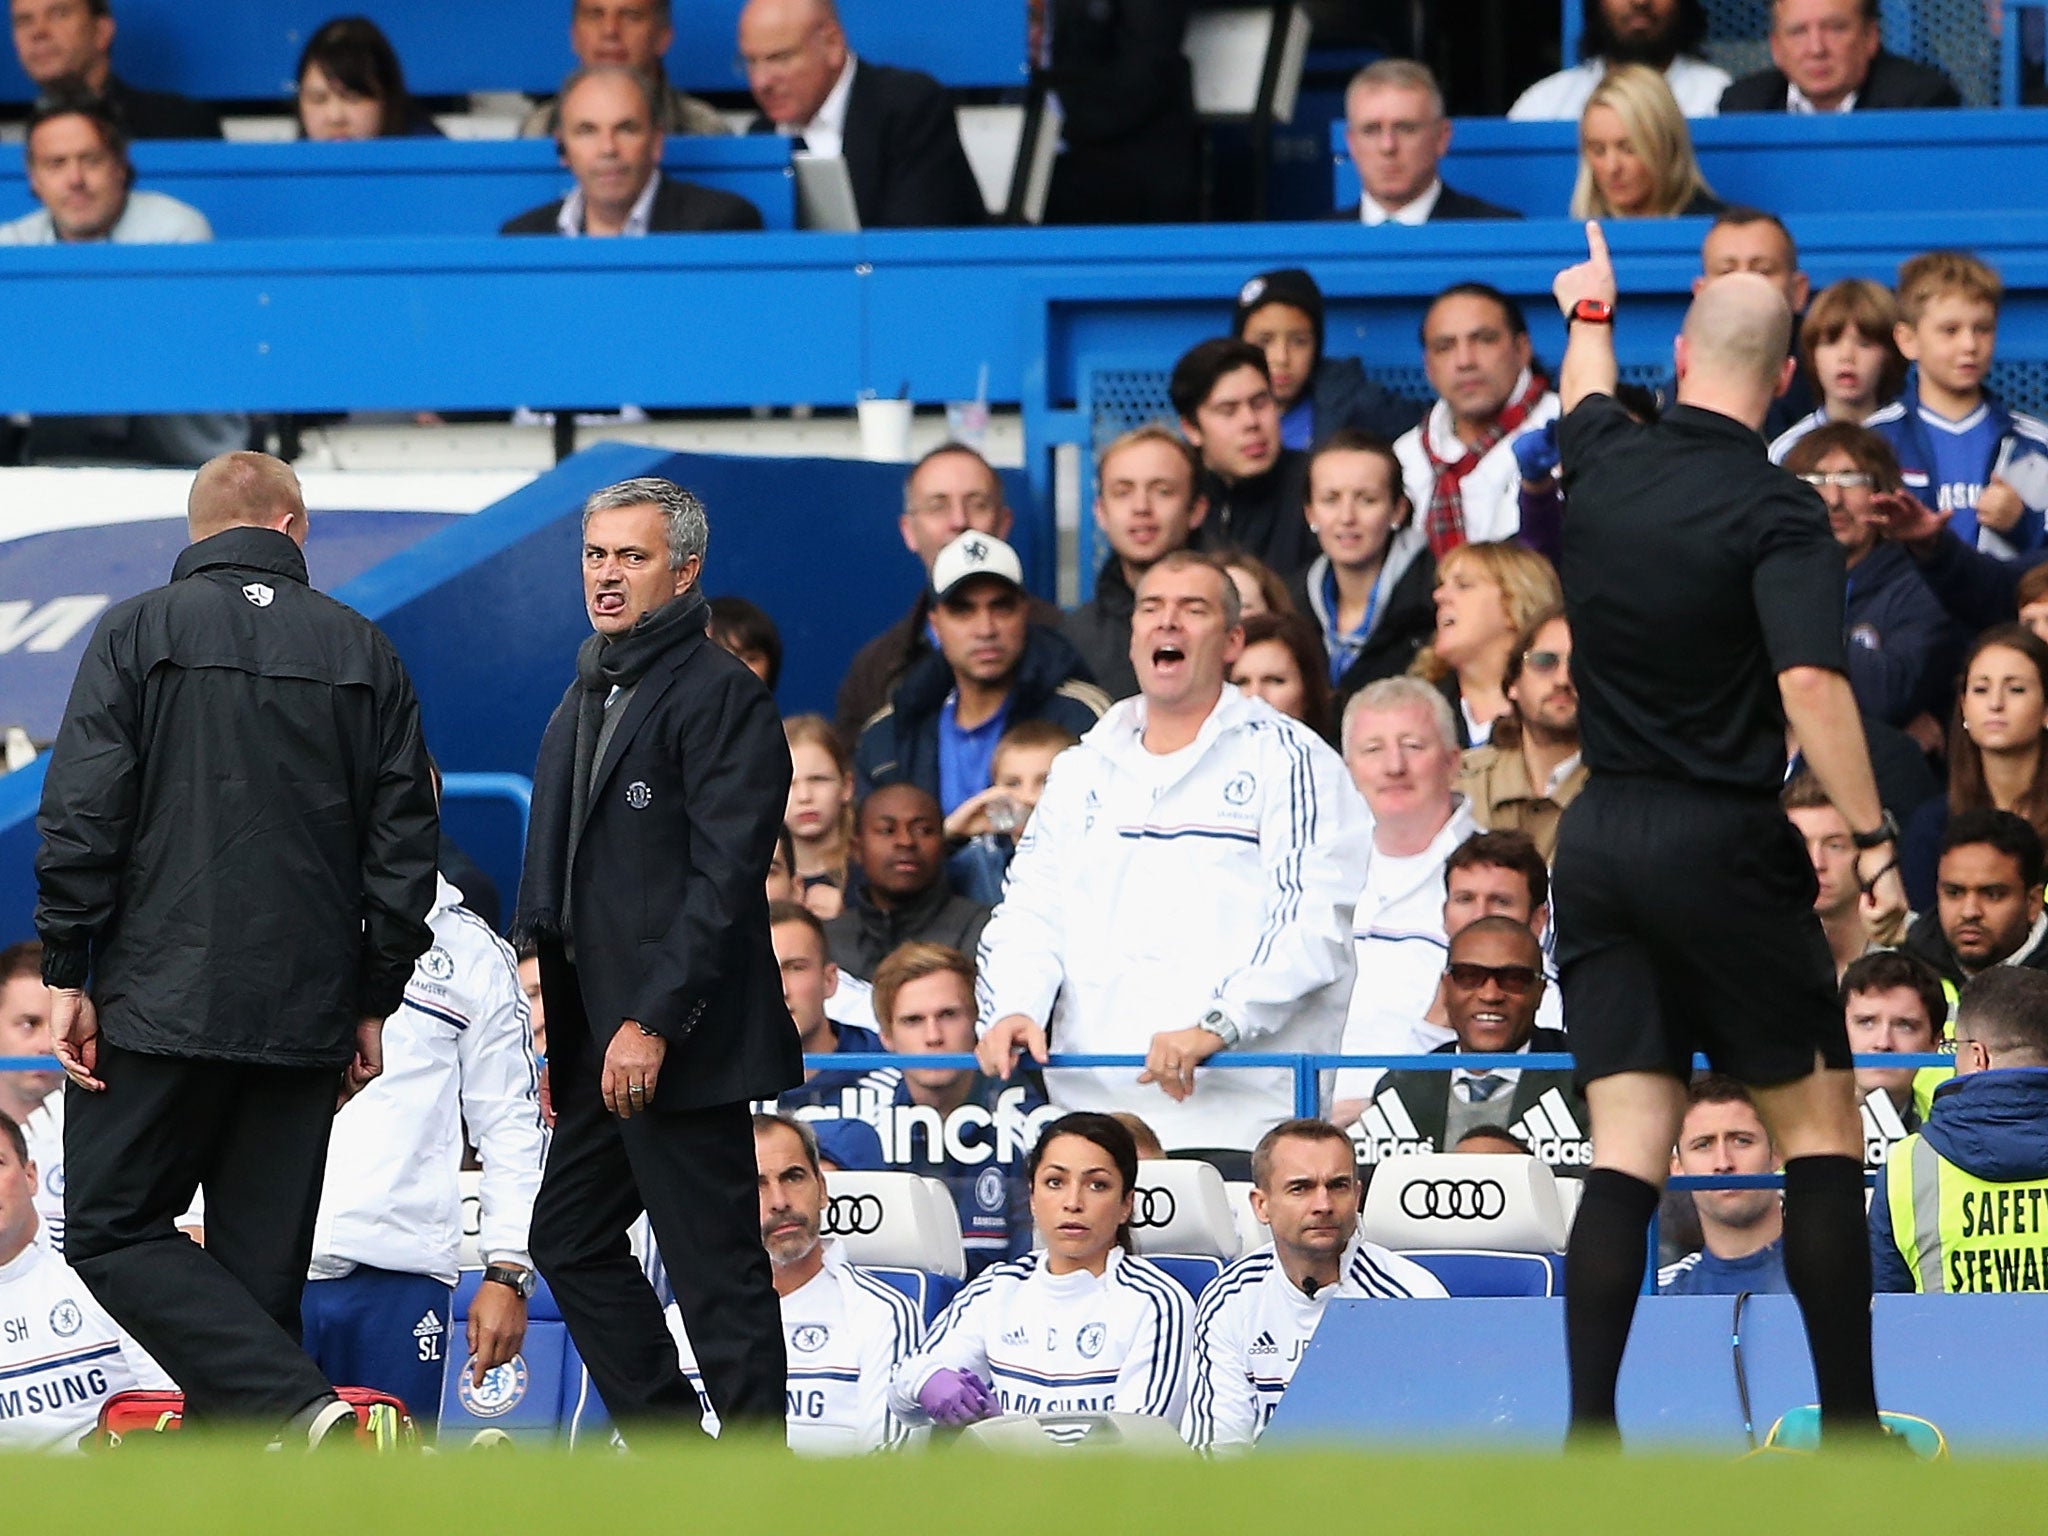 Chelsea manager Jose Mourinho is sent off by referee Anthony Taylor during the Barclays Premier League match between Chelsea and Cardiff City